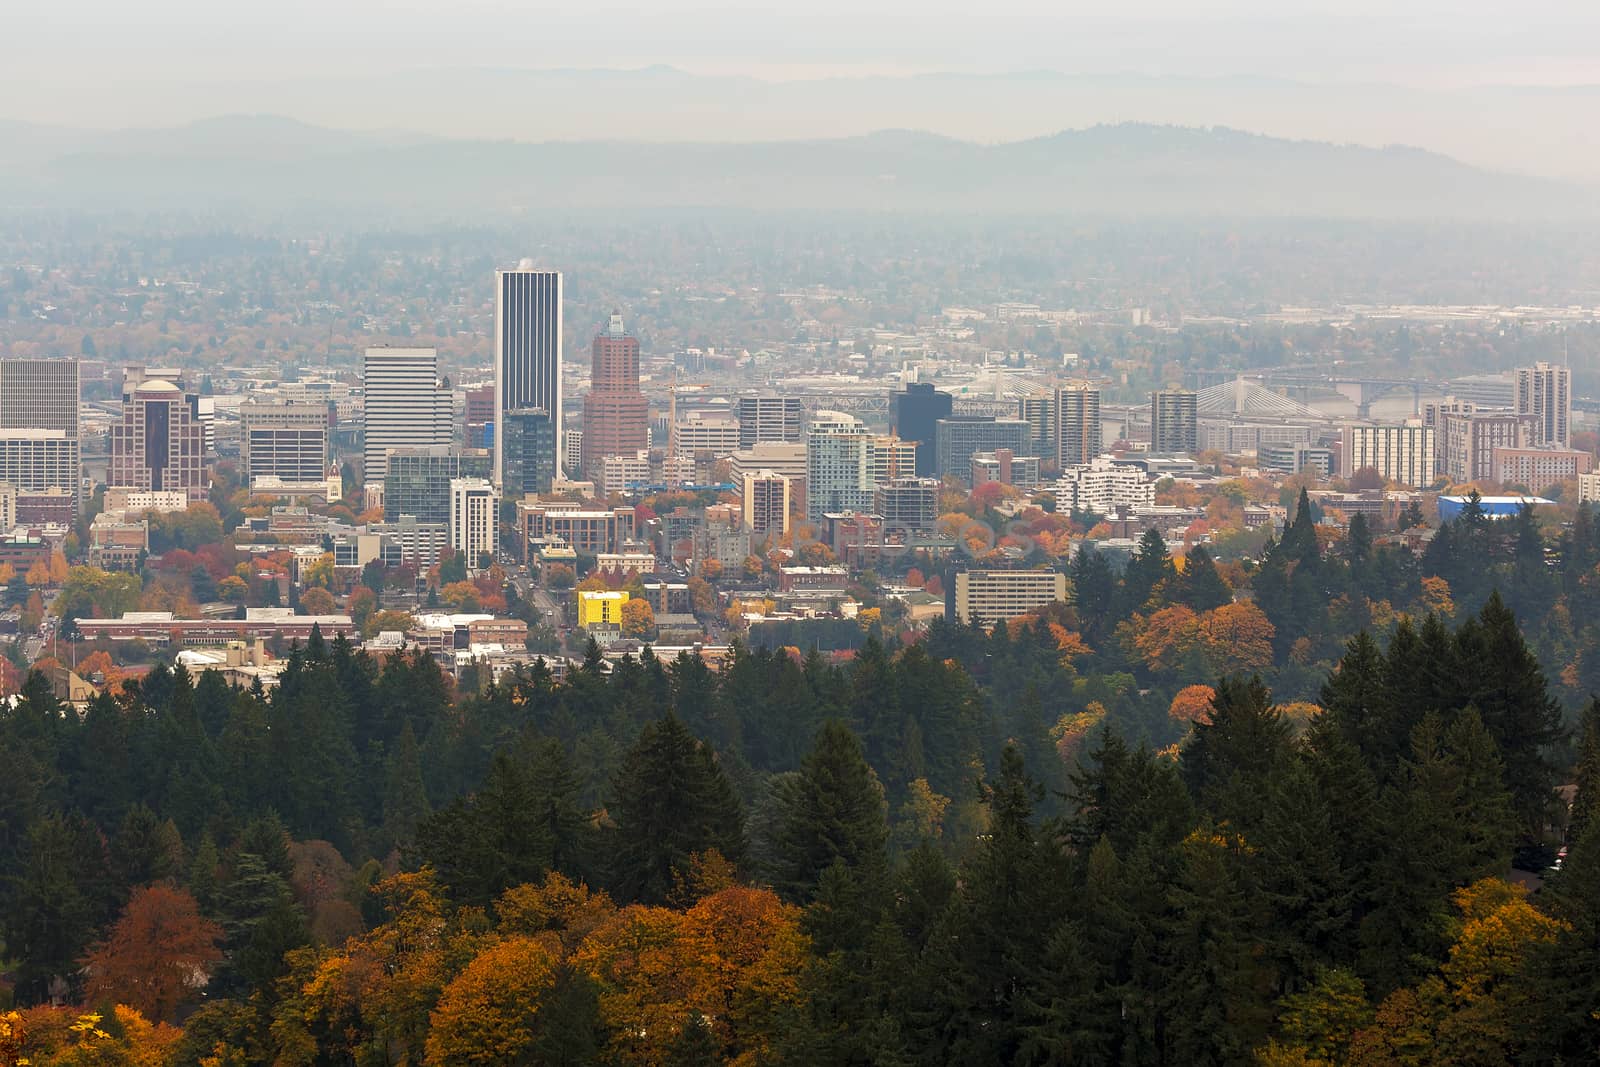 Foggy Fall Day over Downtown Portland Oregon by jpldesigns